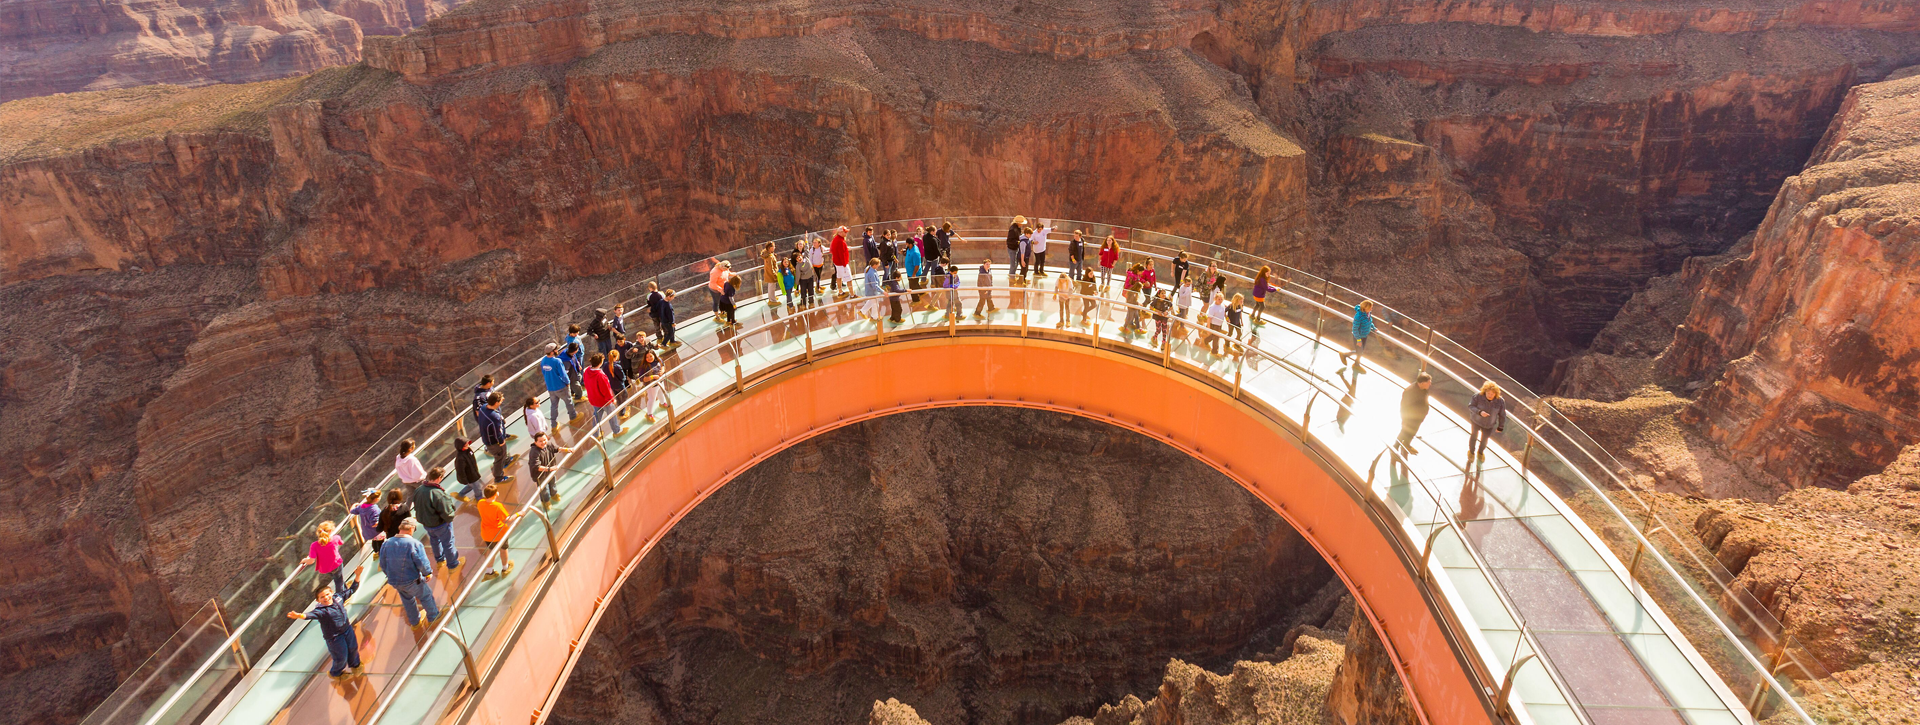 Skywalk at Grand Canyon West with people on it